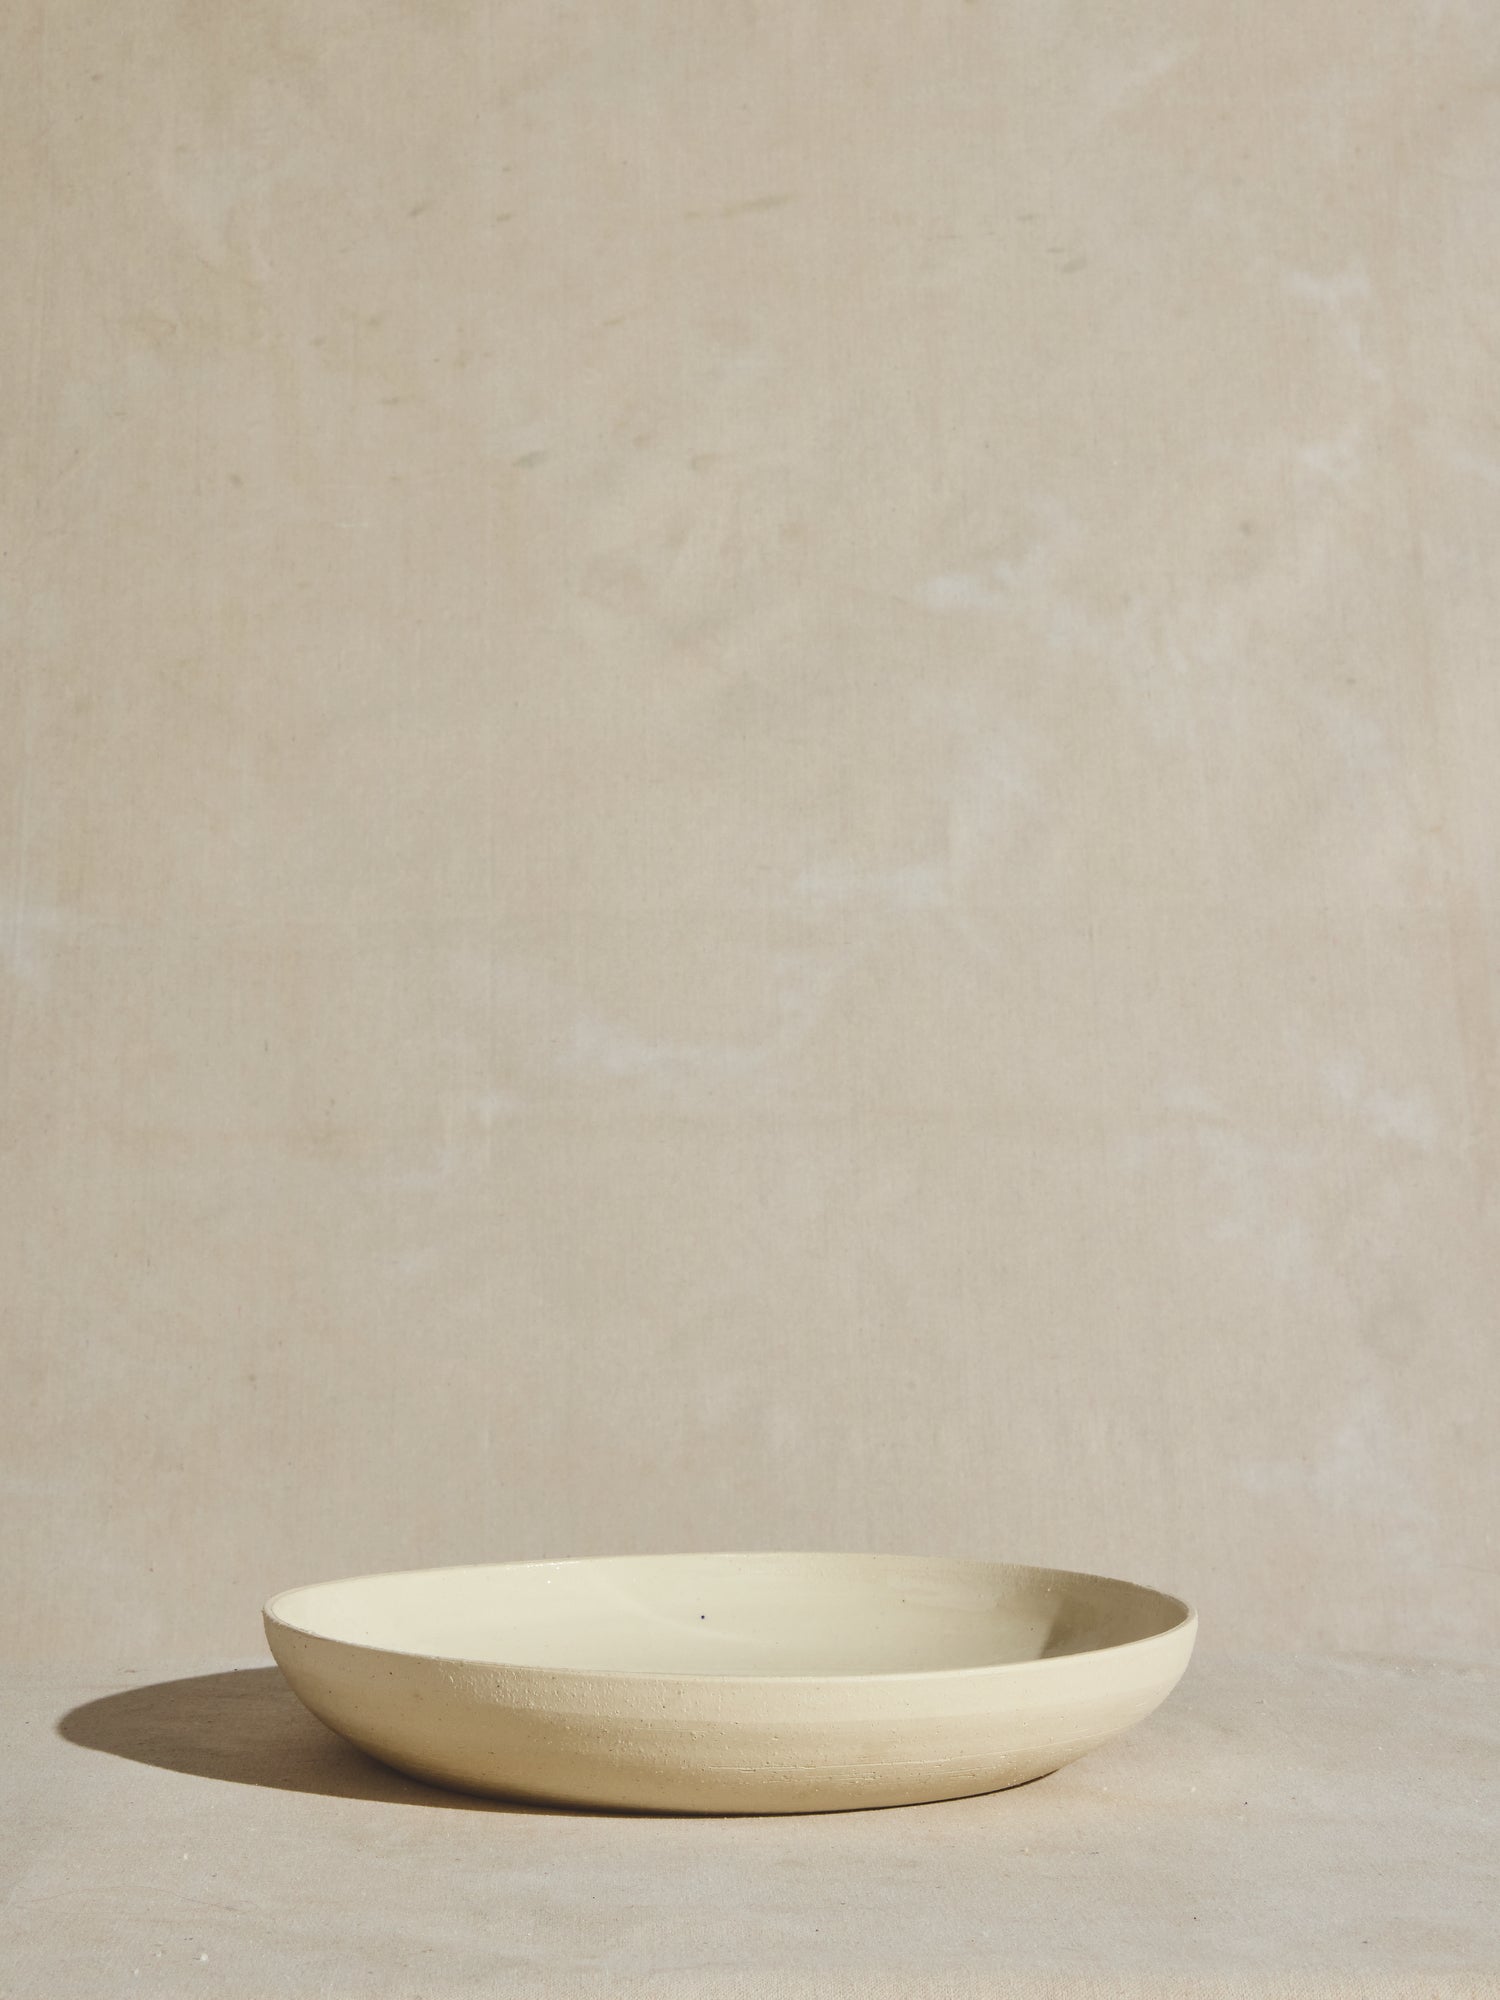 Natural exterior shell and glazed interior thrown salad bowl.